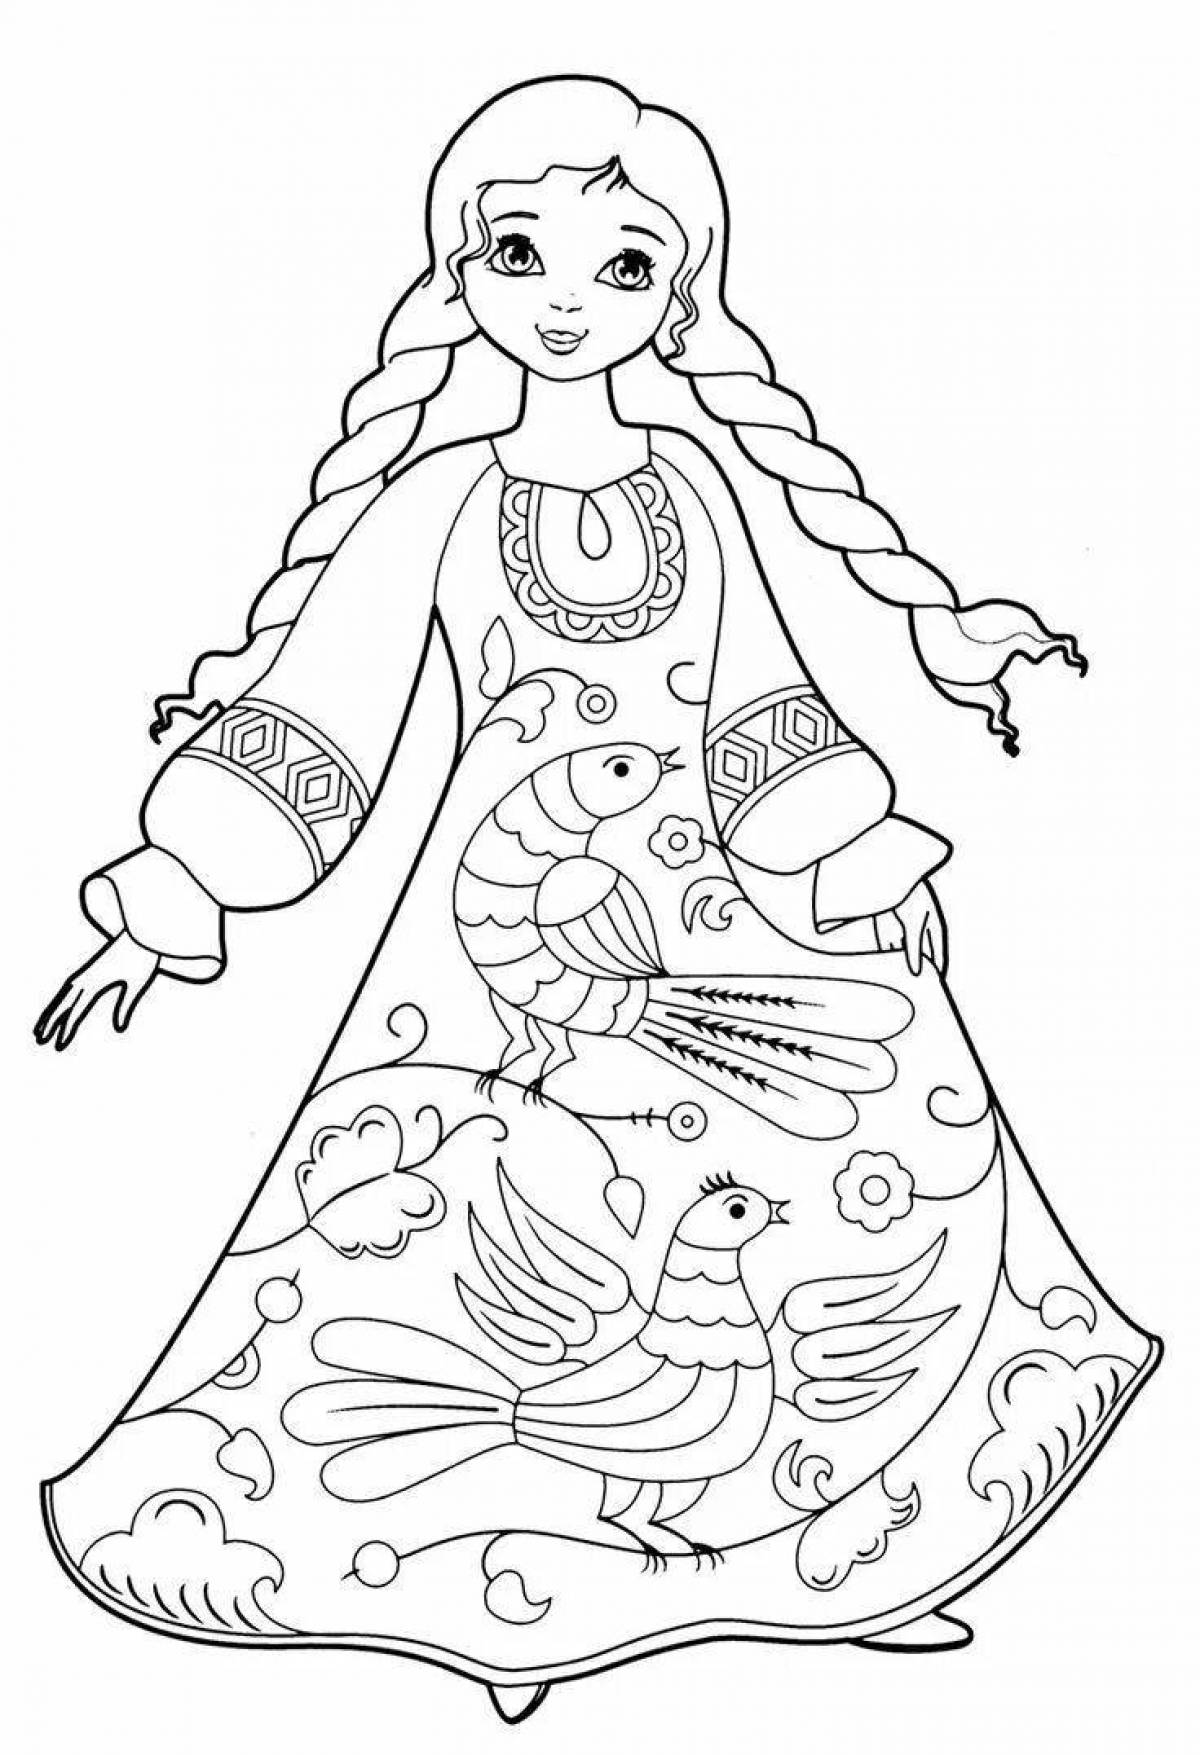 Fabulous Russian costume coloring book for kids